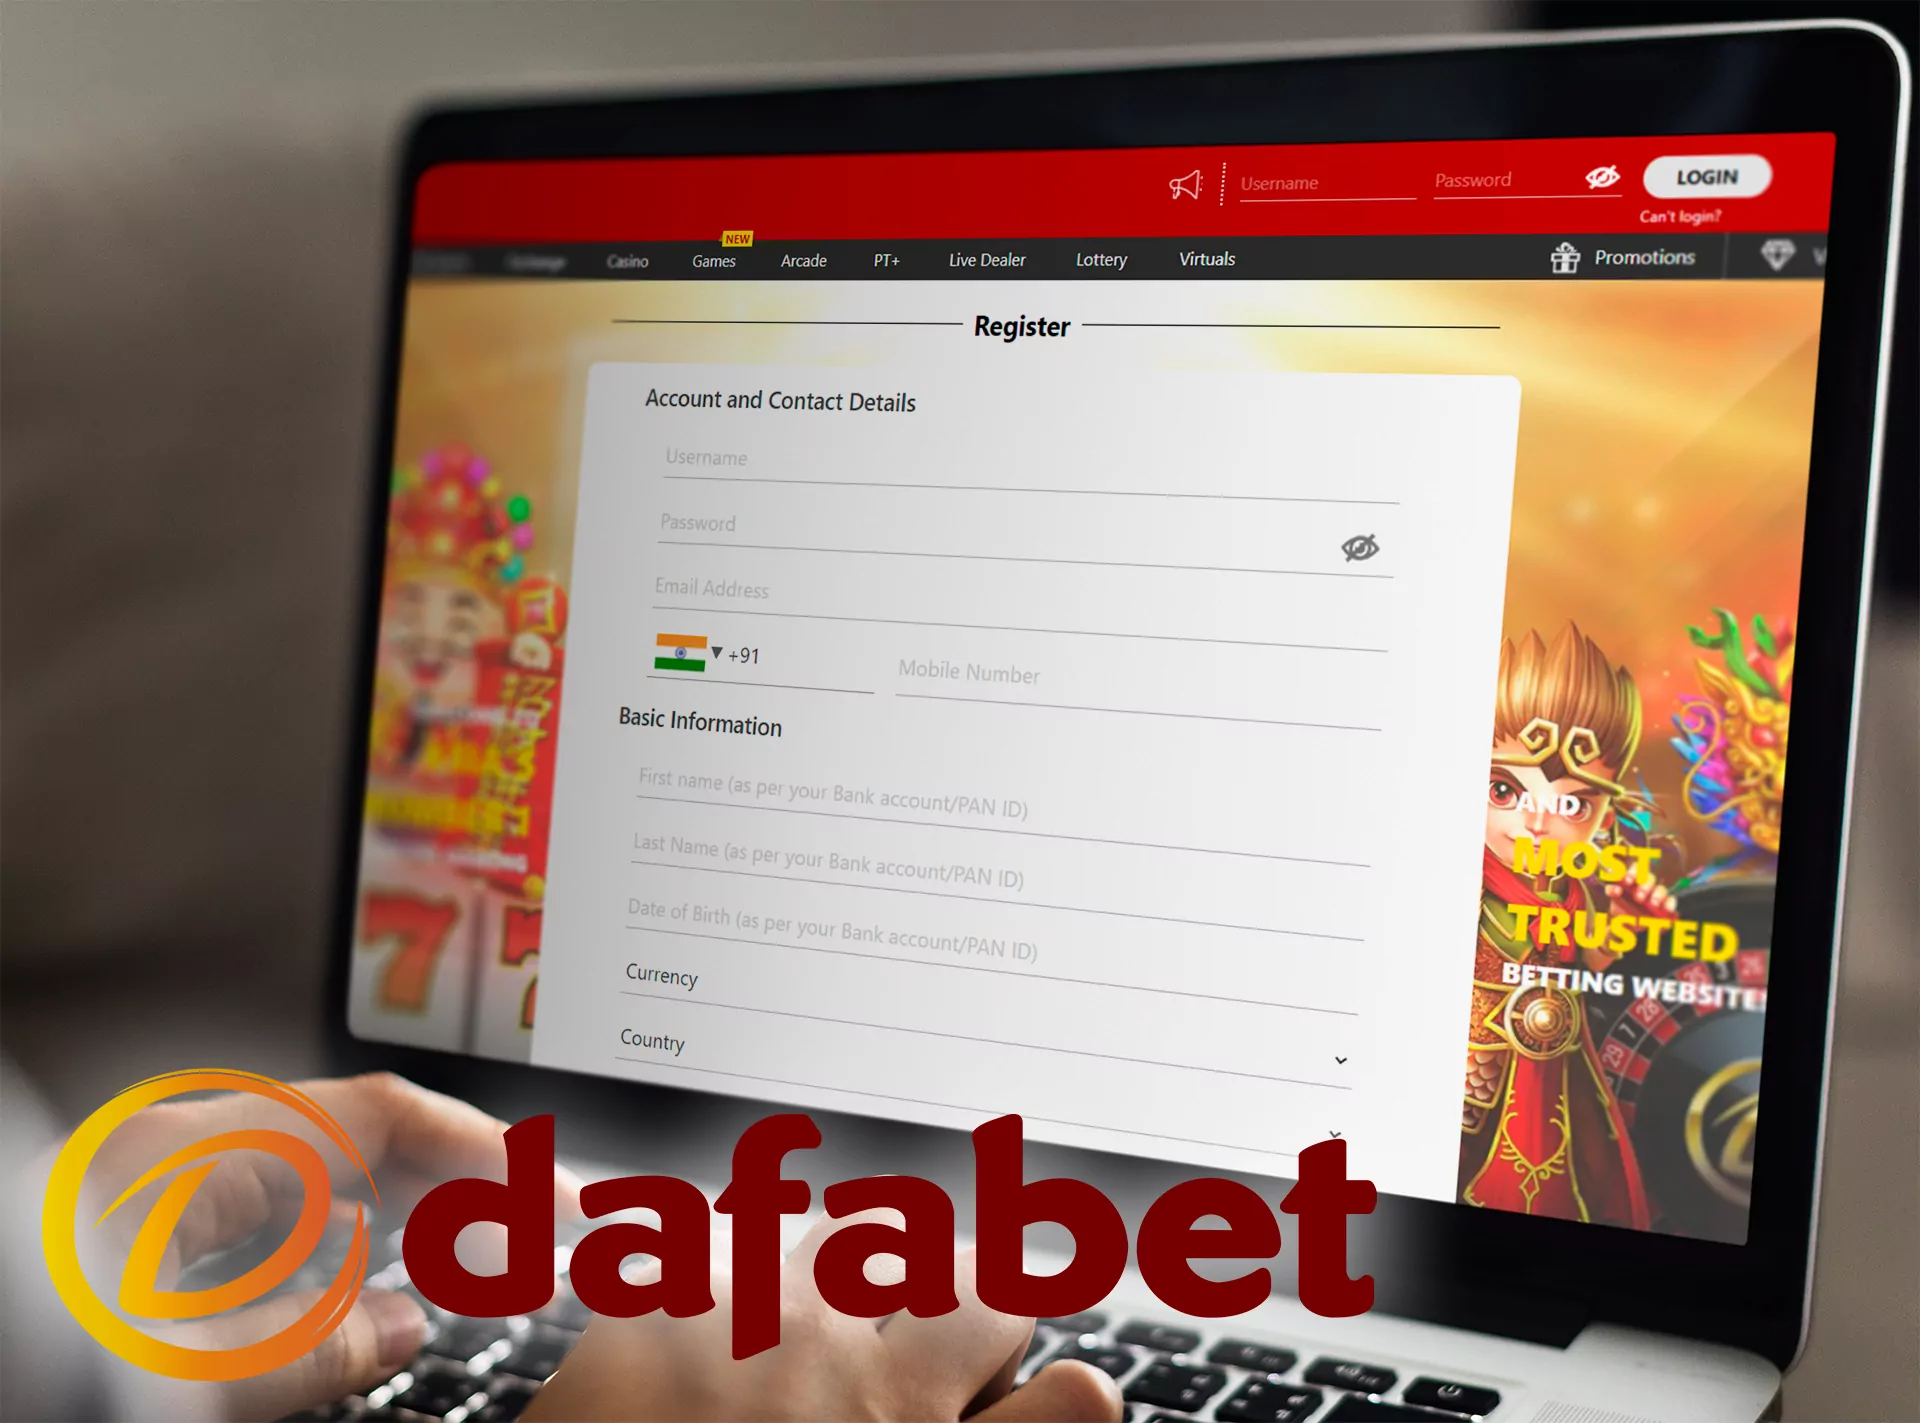 Fill in the registration form on the Dafabet Casino website.